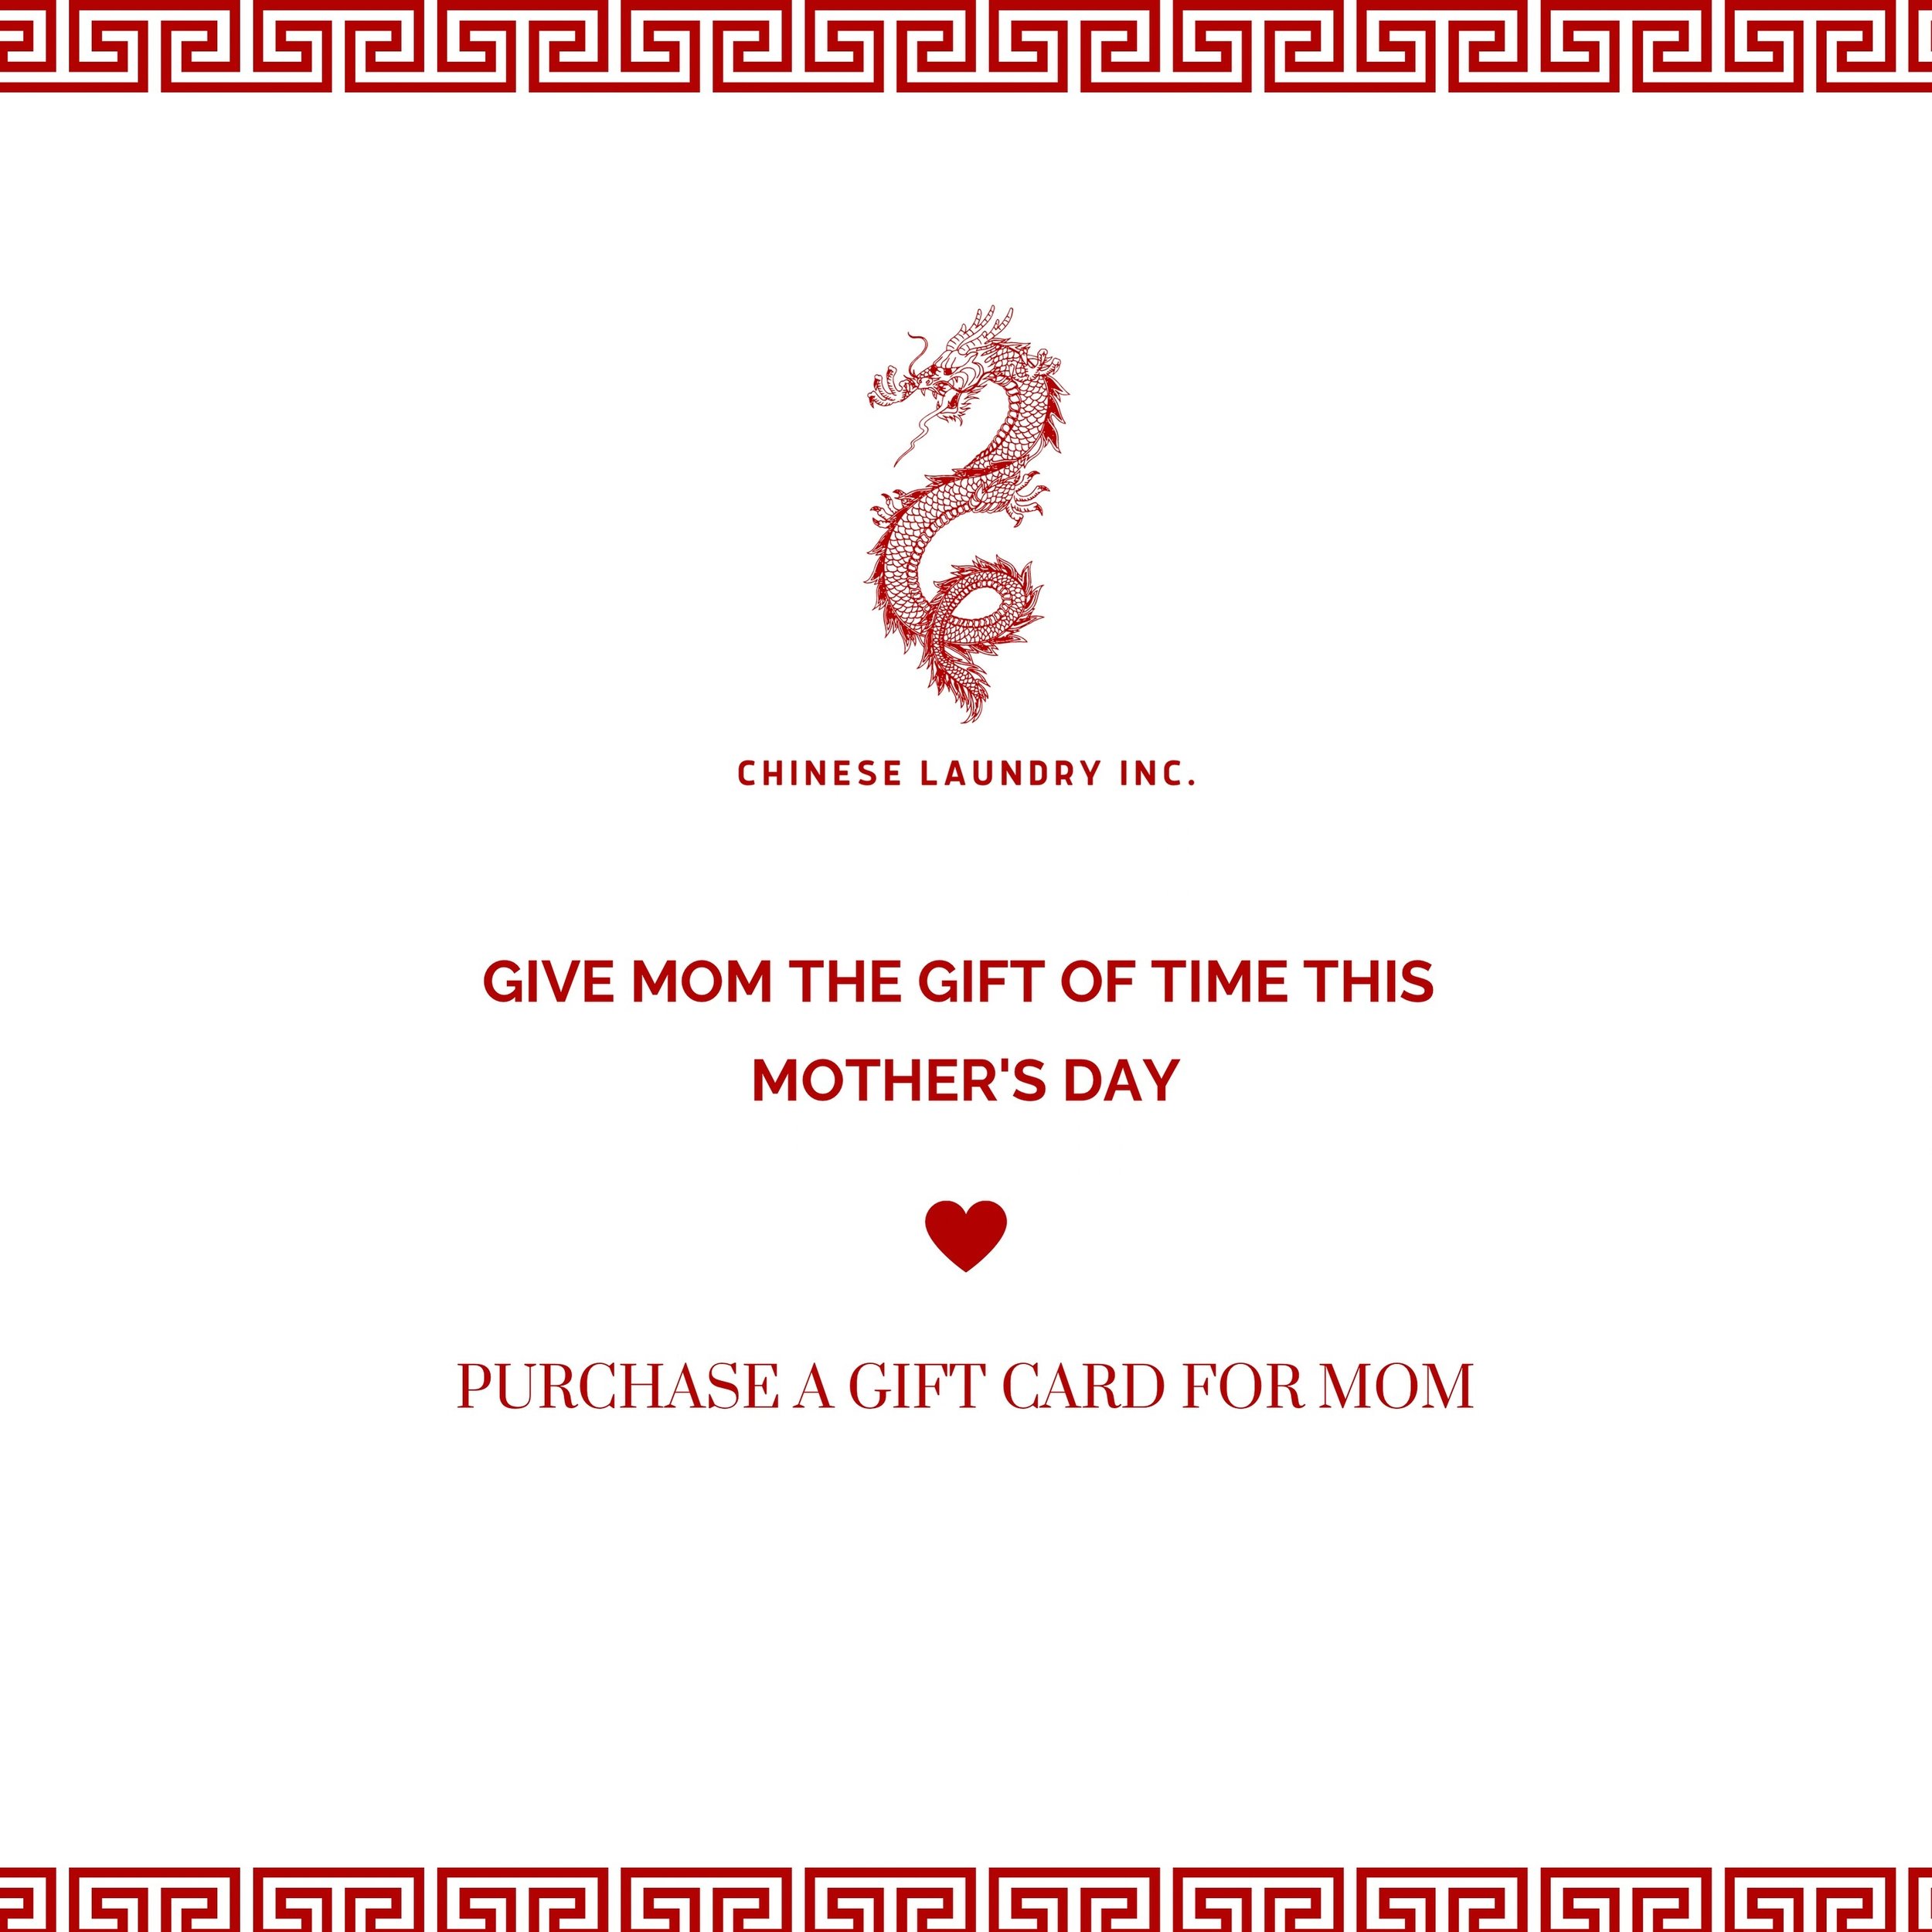 Give Mom the gift of time this Mother&rsquo;s Day❤️

We pickup &amp; deliver all over Manhattan 
Financial District - 110th Street 
.
.
.
#enterthedragon #laundry #washandfold #washandpress #handfinished #handmade #dryclean #nyc #newyorkcity #mahnatt